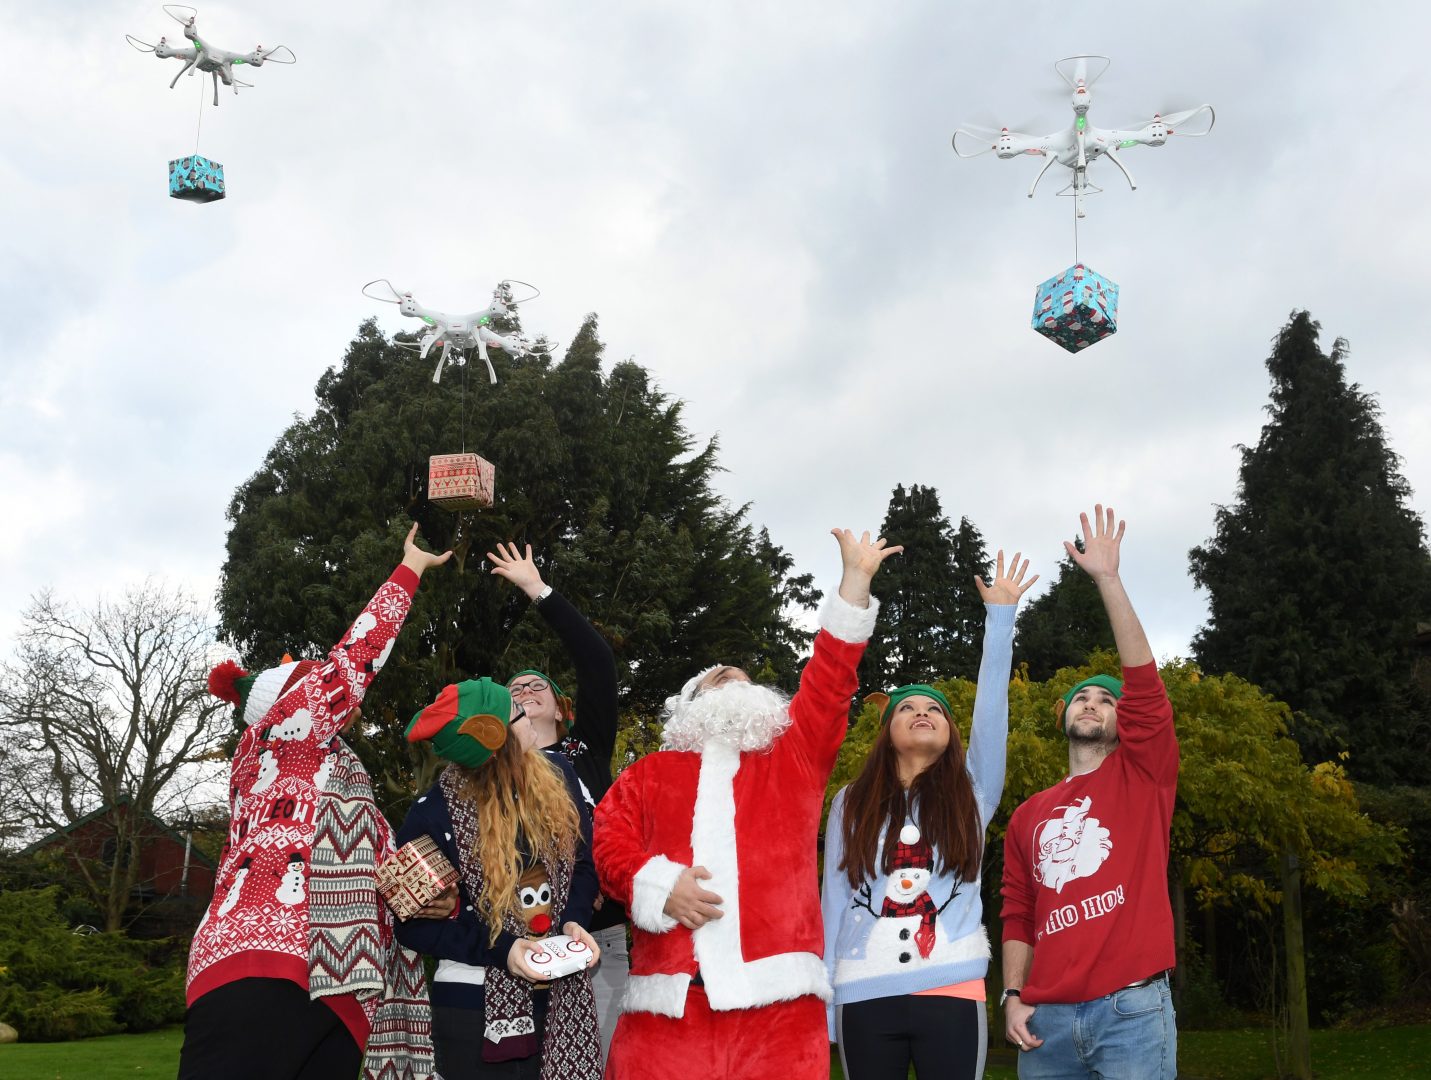 ADVENT CALENDAR Is Santa using drones now? Find out behind DOOR NUMBER